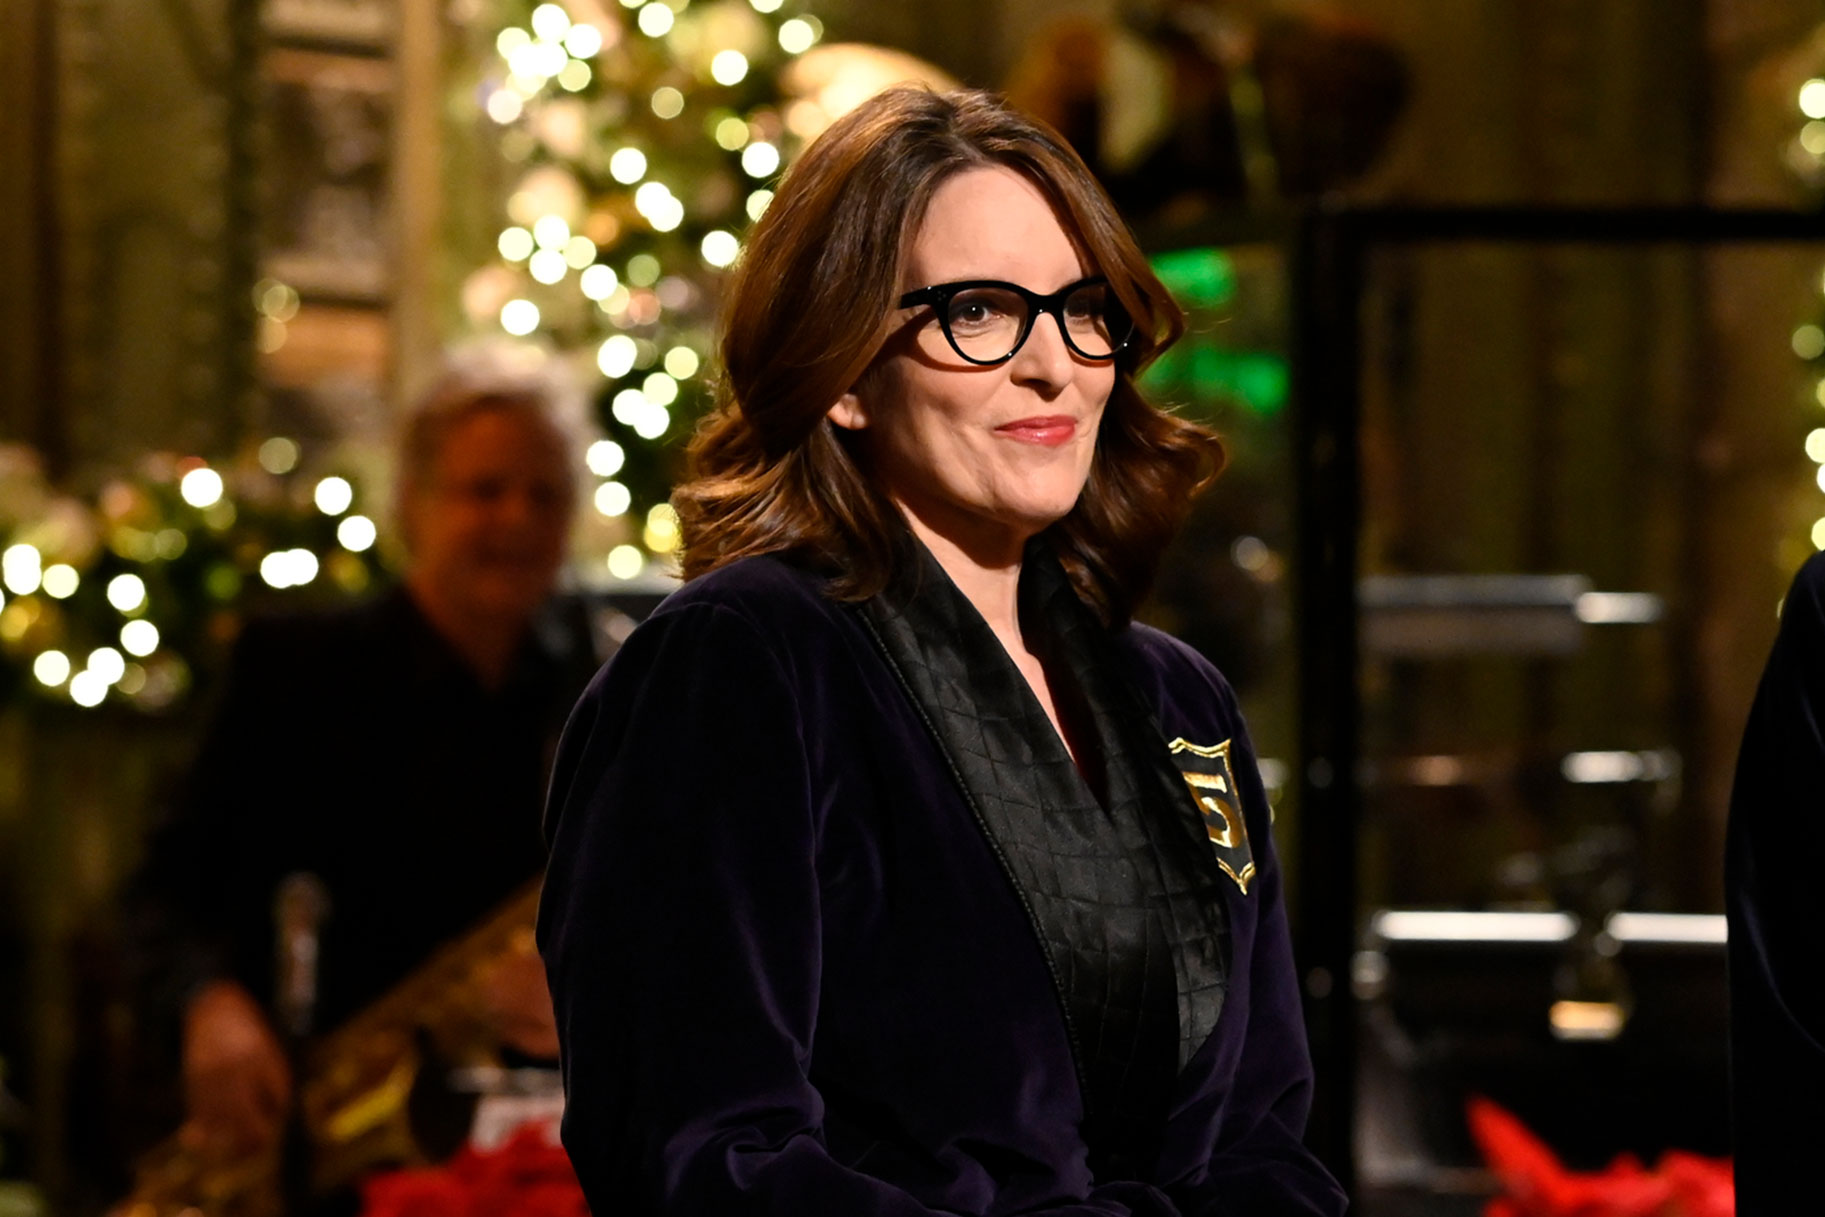 How to Watch the Saturday Night Live Christmas Special